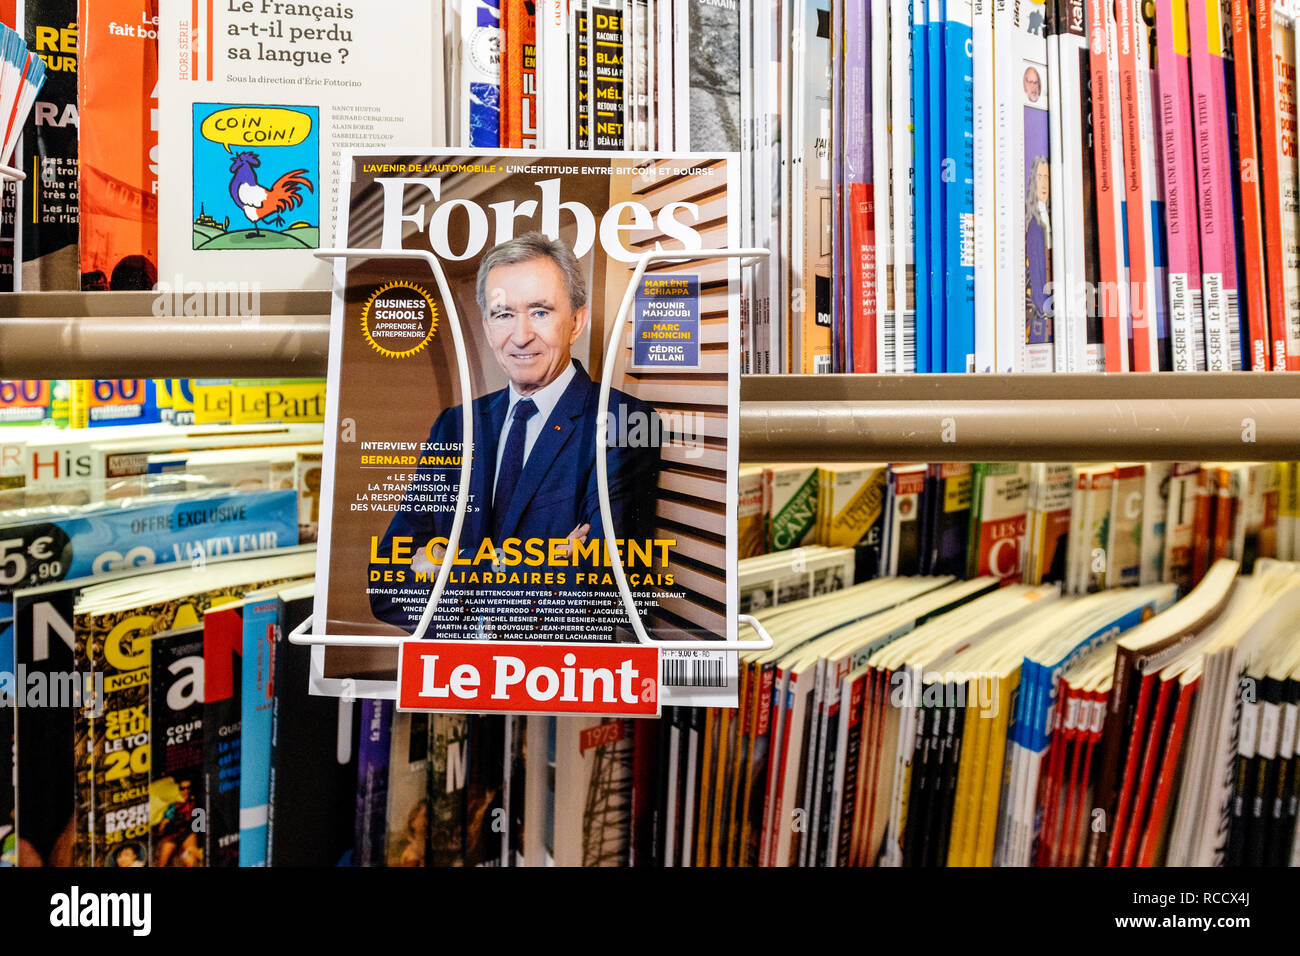 PARIS, FRANCE - MAR 15, 2018: Top of billionaires in France as of Forbes Magazine with portrait of LVMH owner Bernard Arnault at press kiosk Stock Photo